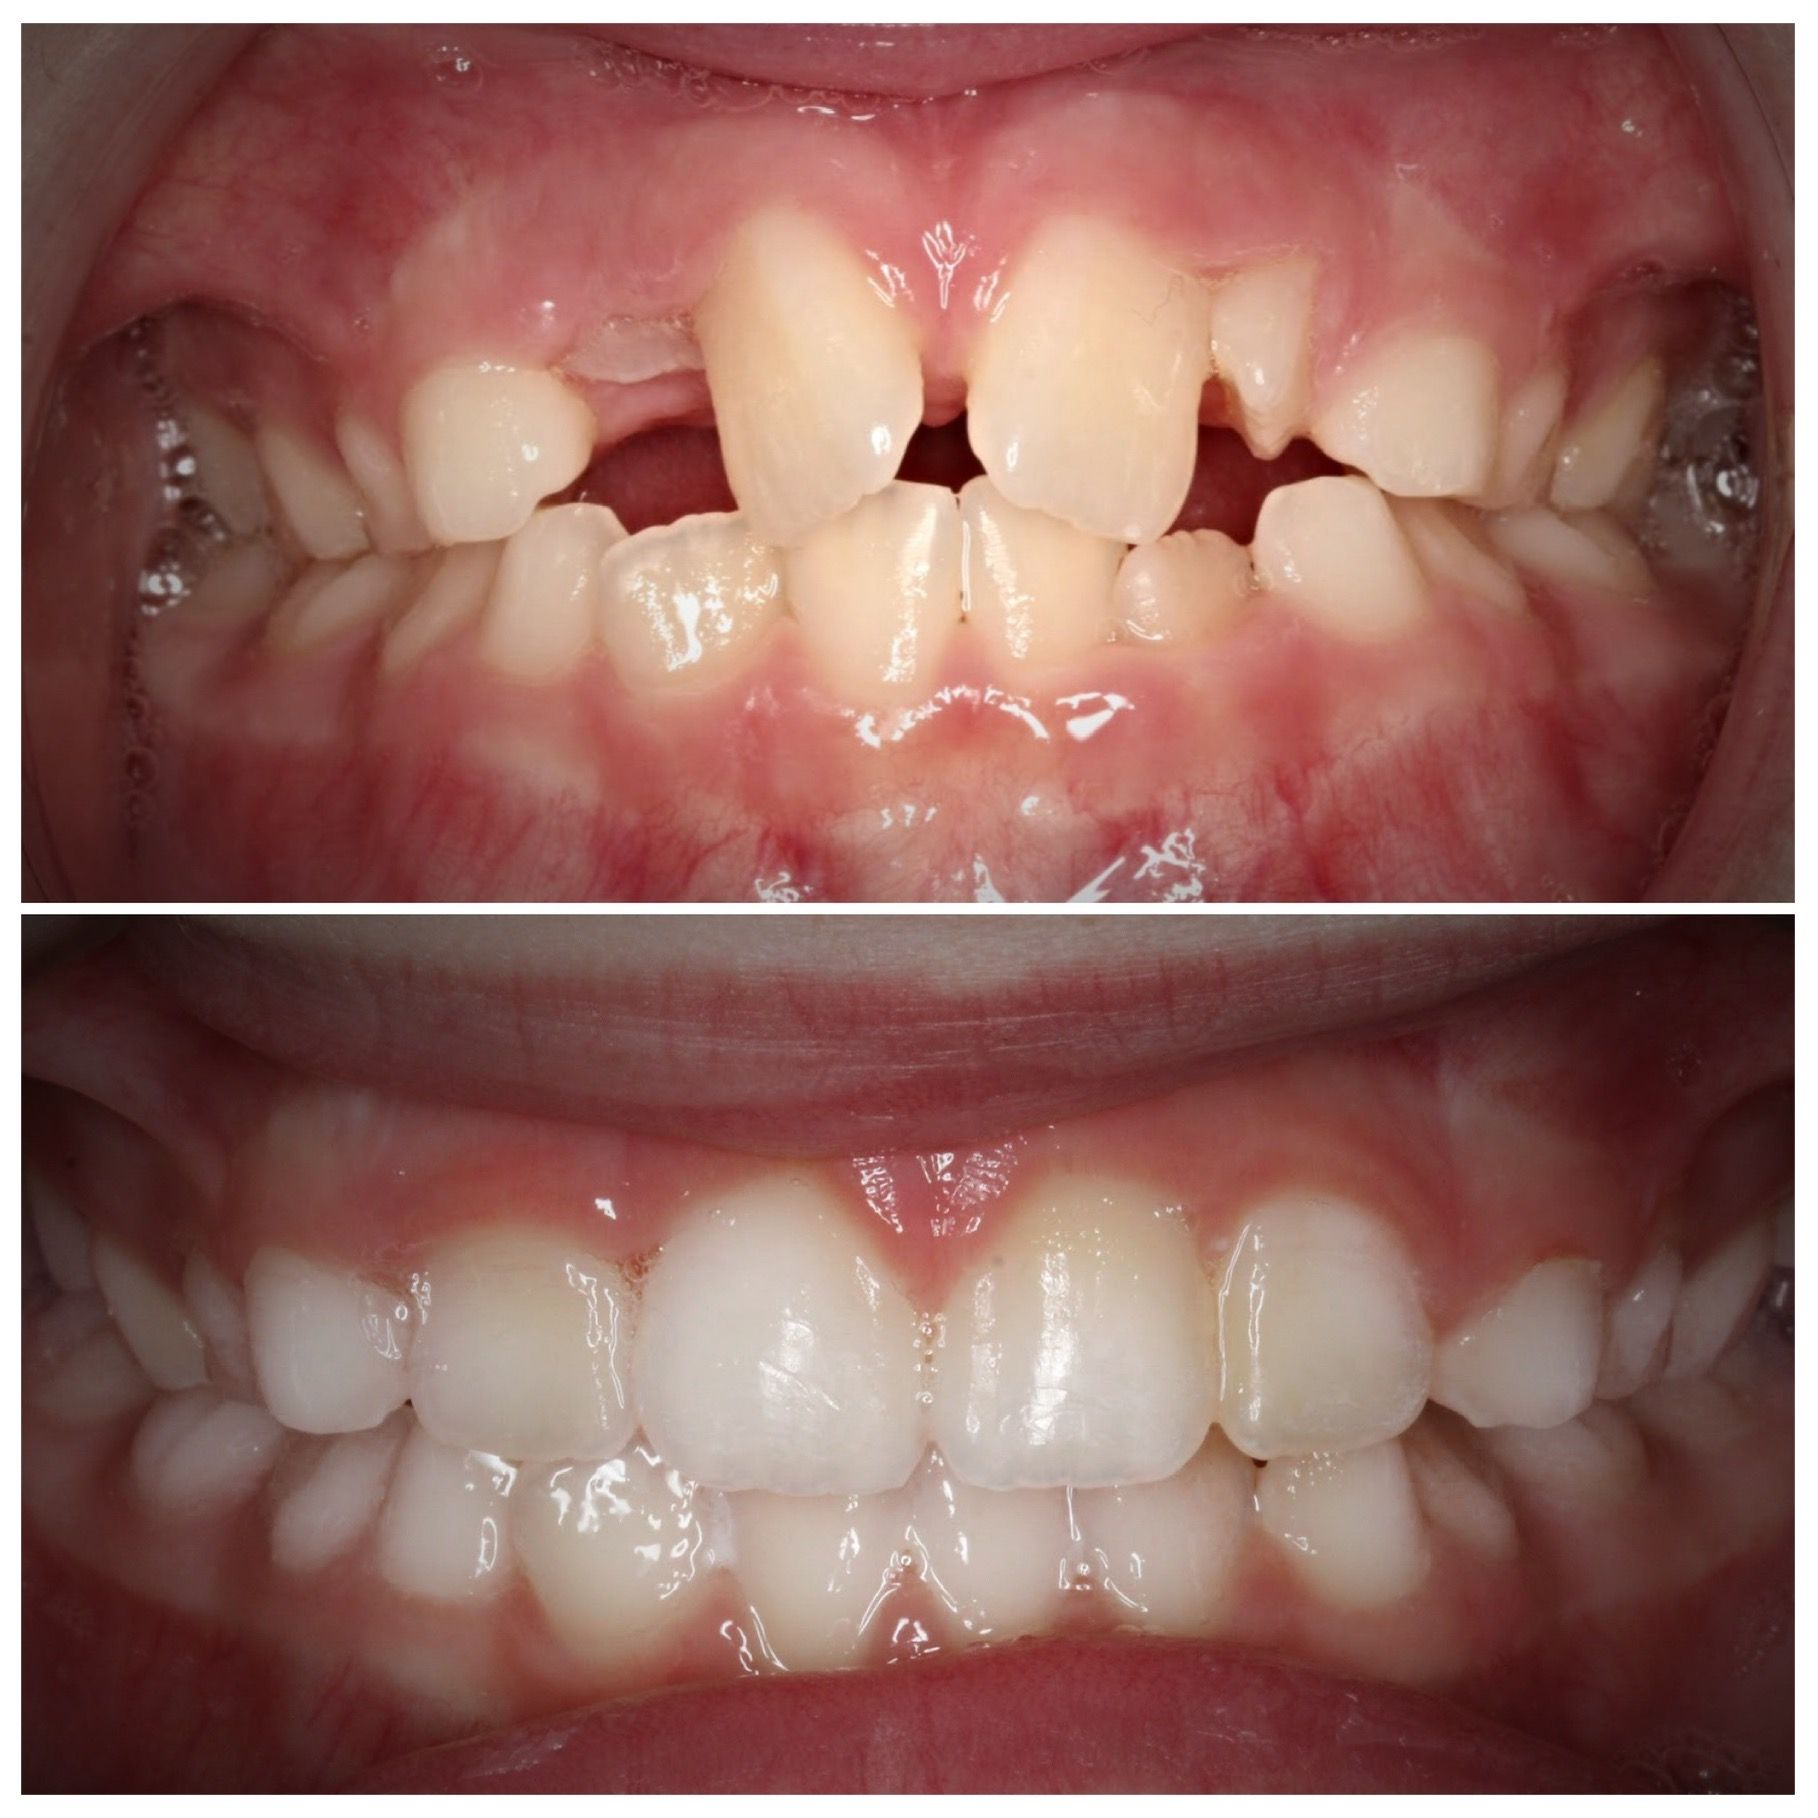 A before and after picture of a child 's teeth